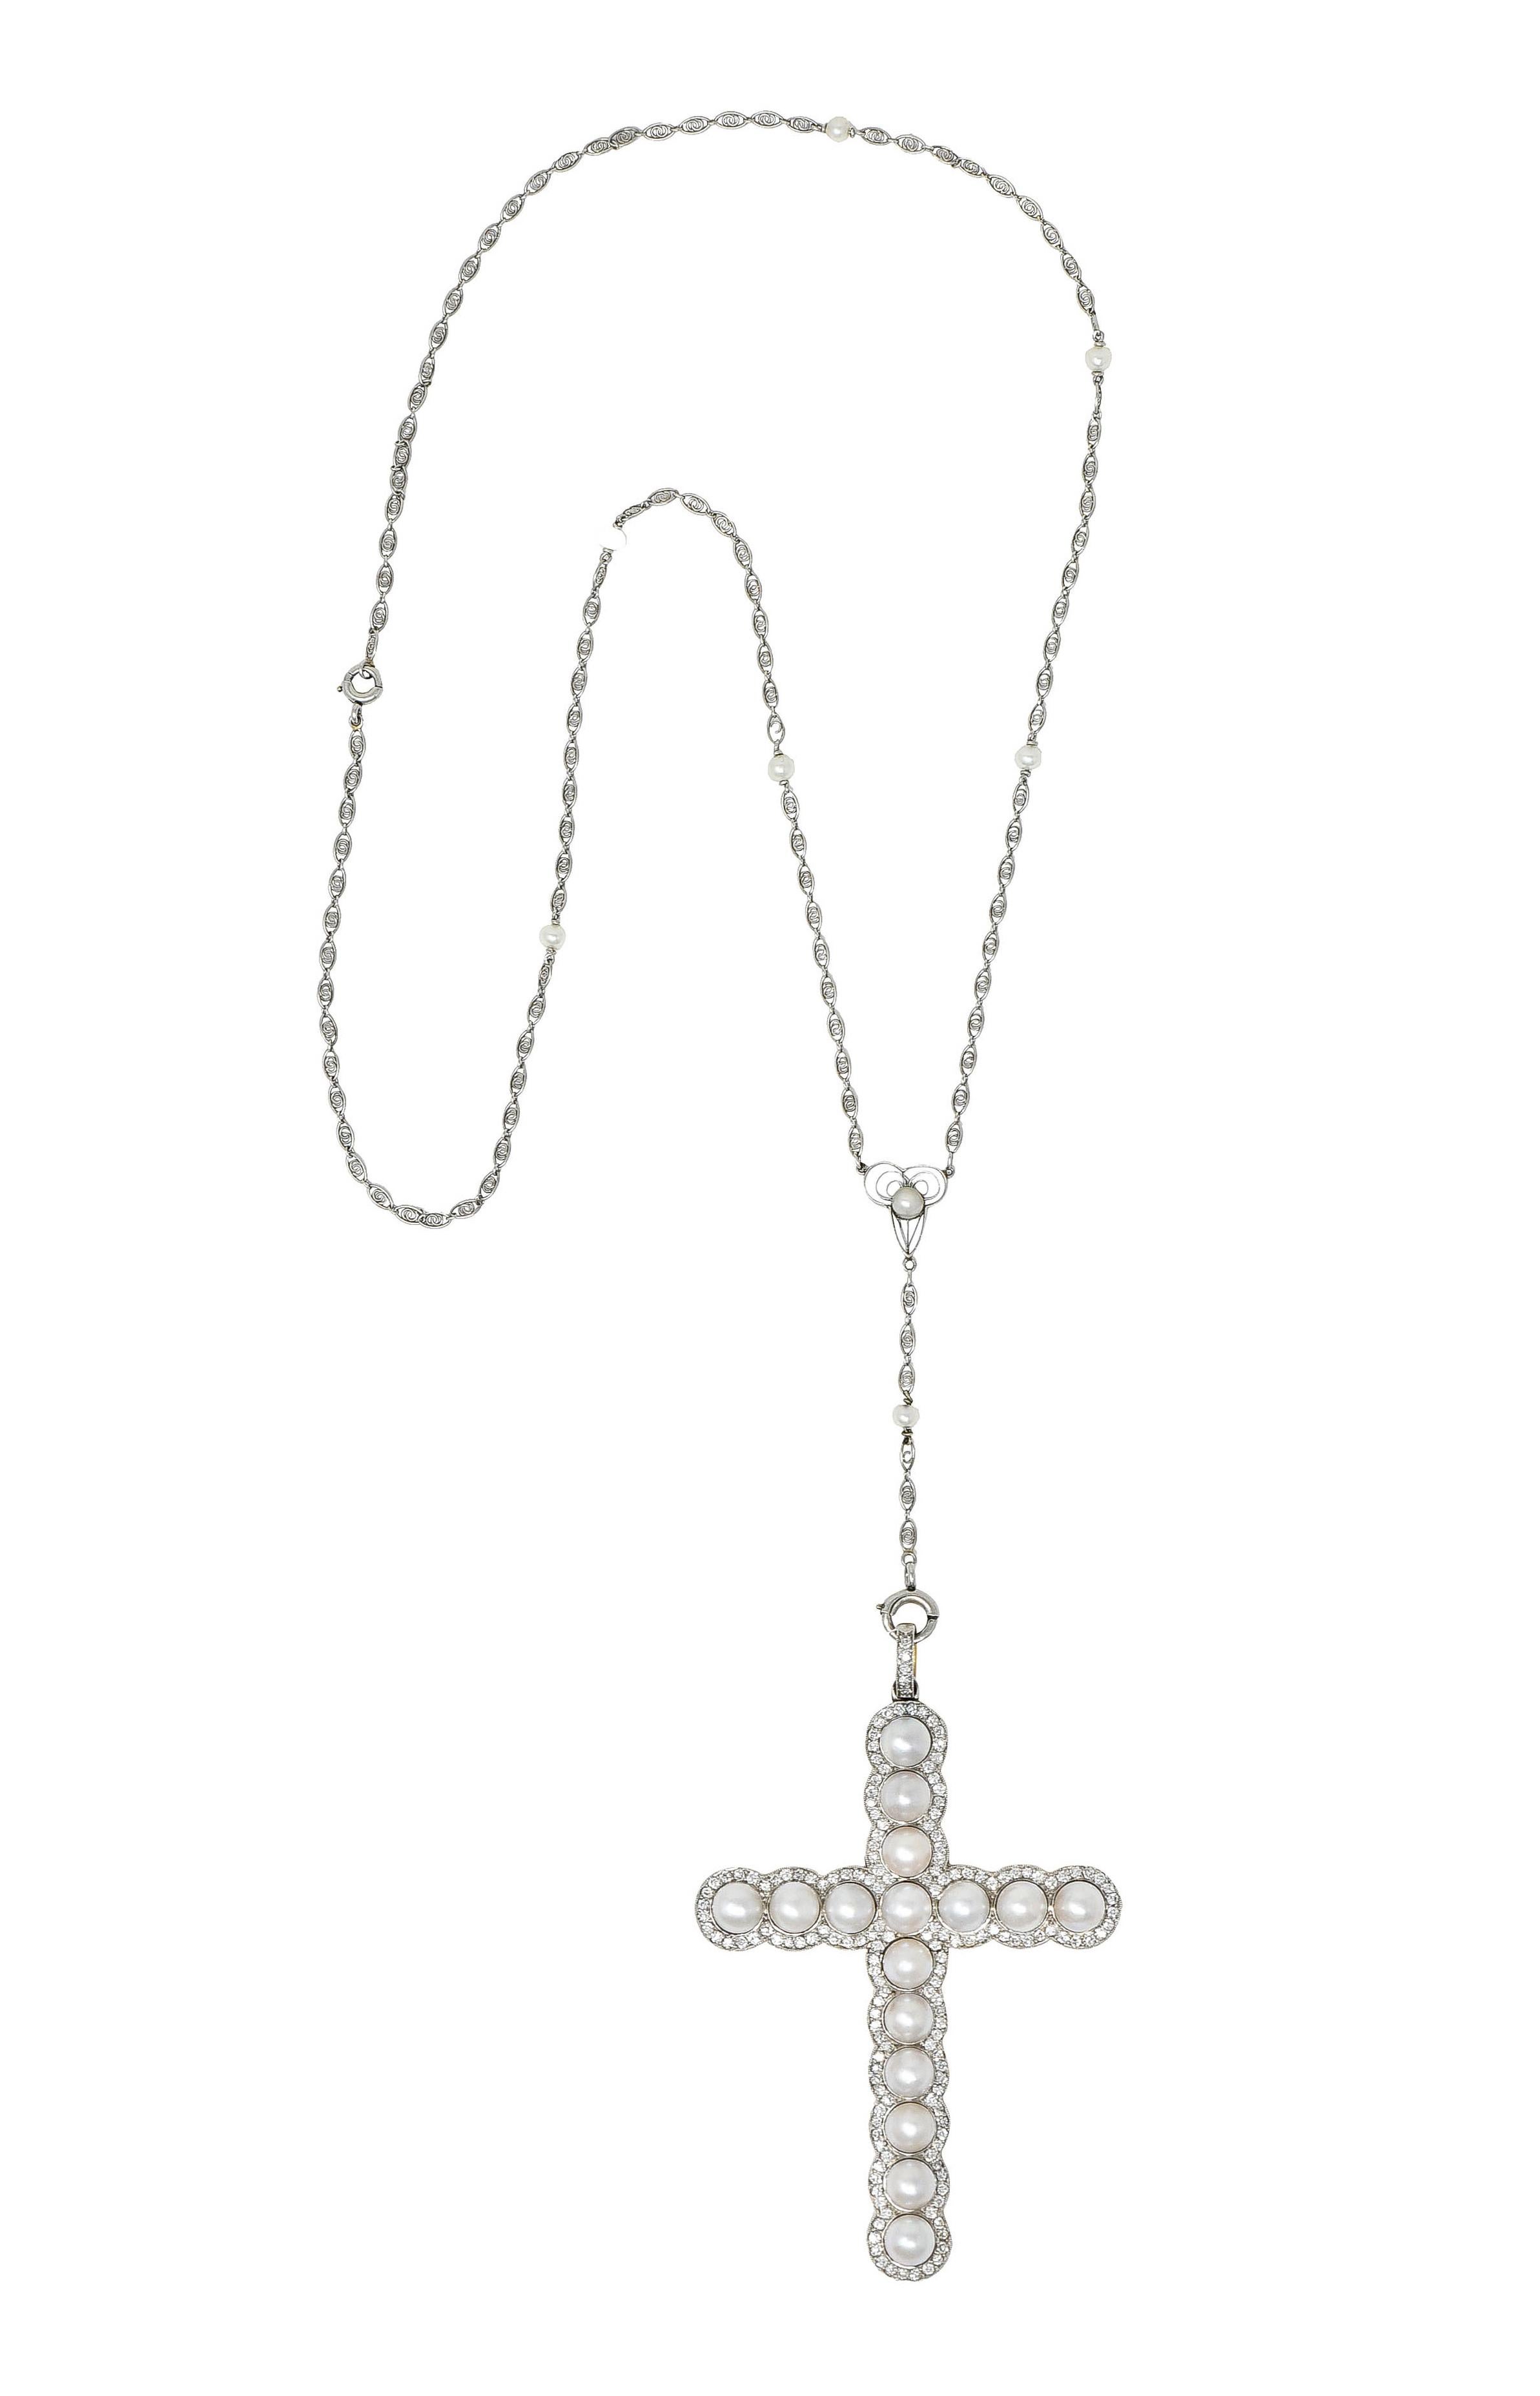 Chain necklace is comprised of spiraled eyelet links interspersed with 3.5 mm pearl stations

Terminating as a trefoil center station with a C clasp drop that suspends a substantial cross pendant

Cross features 6.0 mm button pearls - cream in color